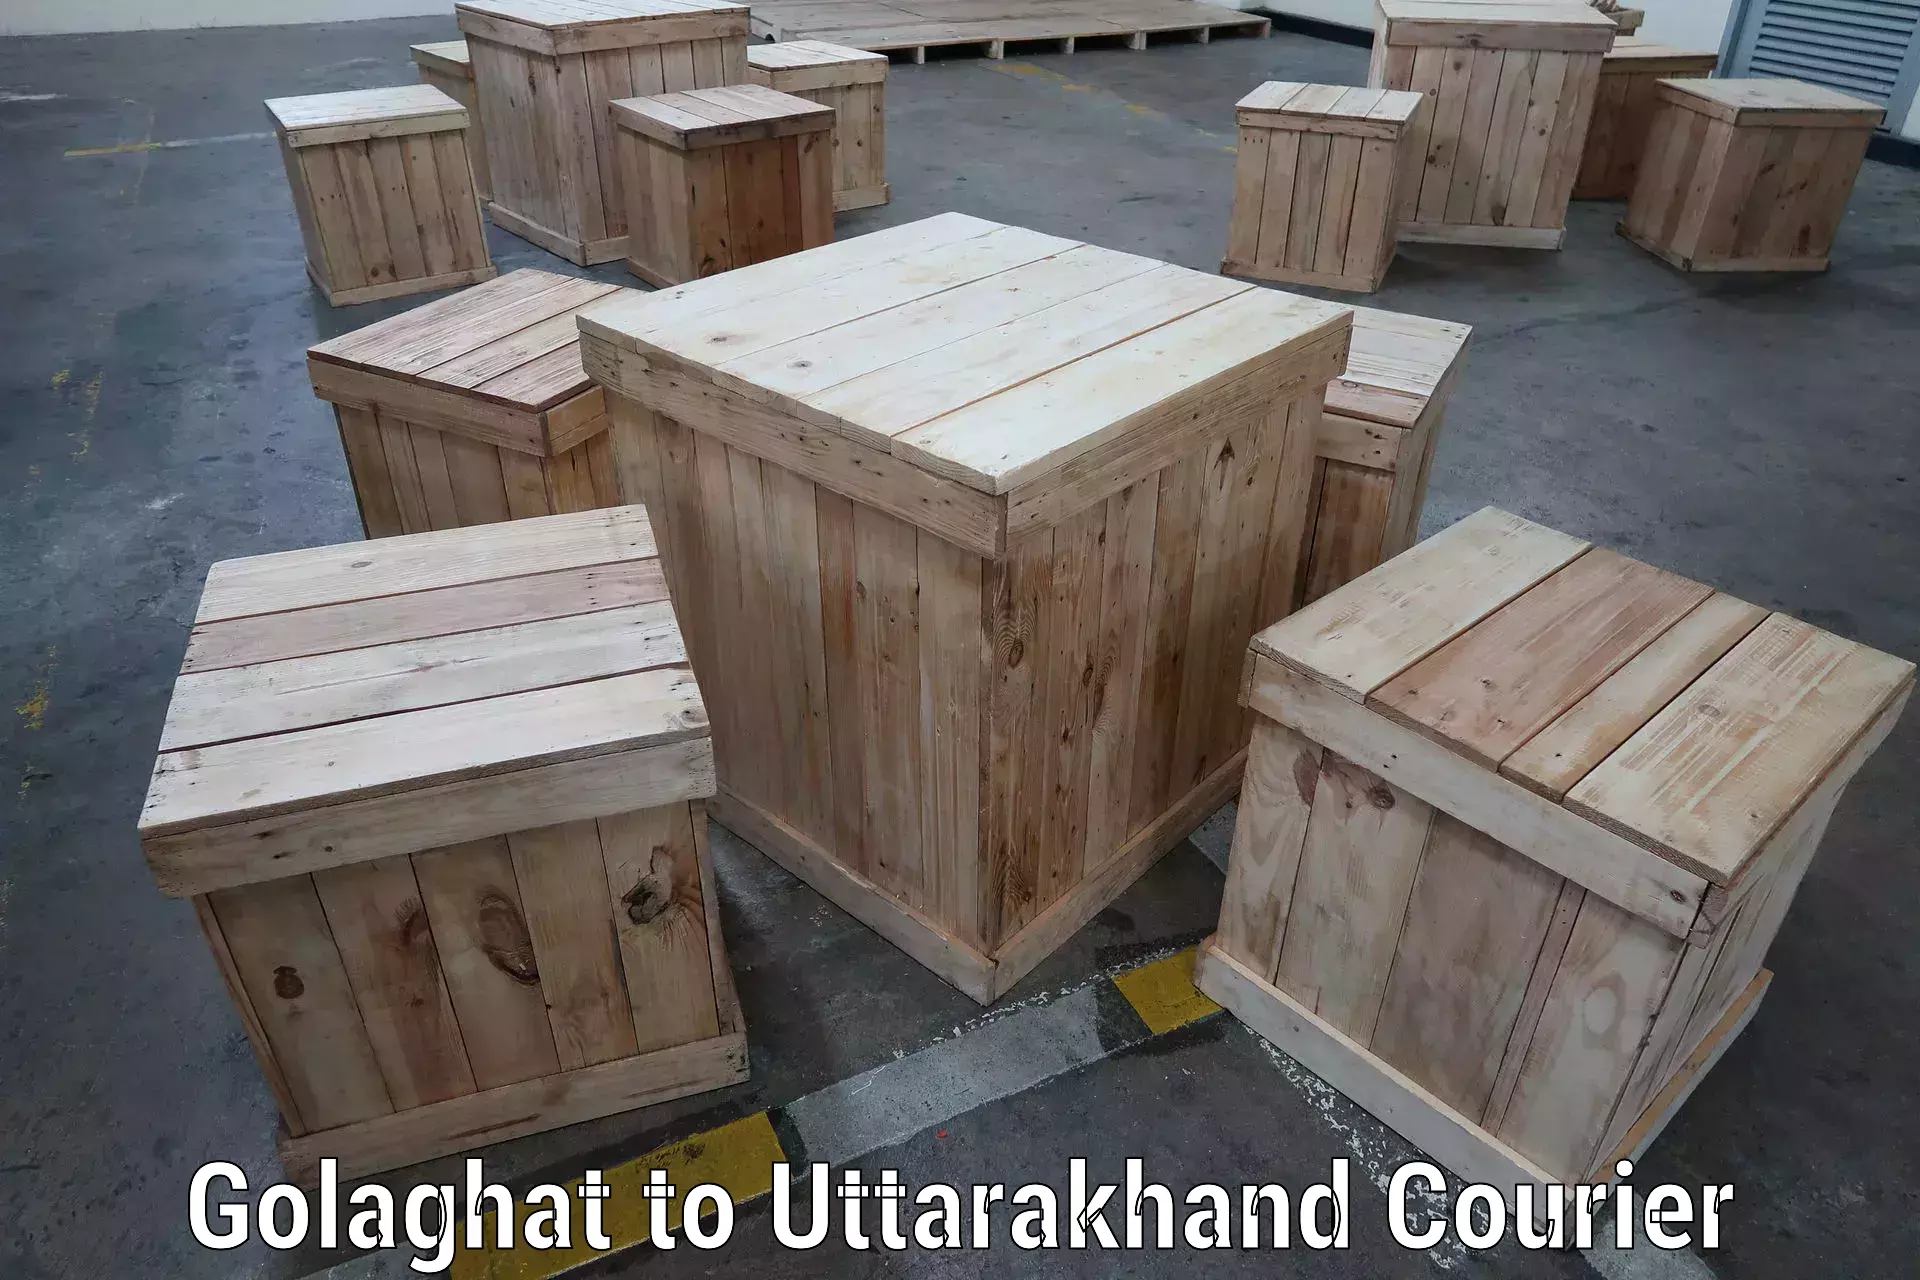 Express delivery capabilities Golaghat to Uttarakhand